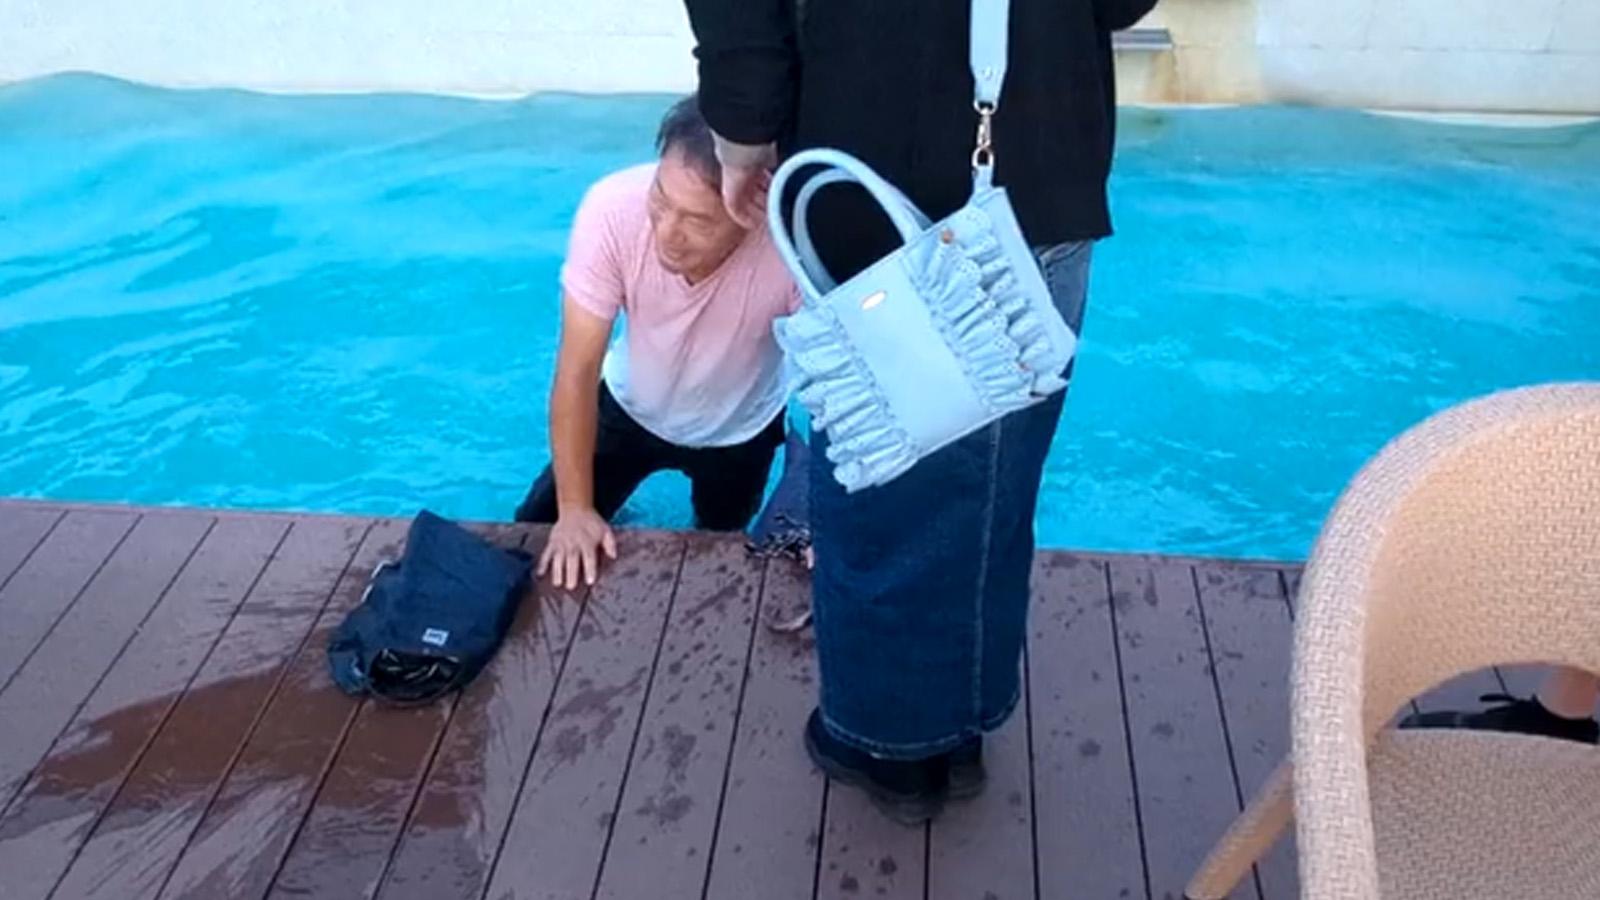 Man ends up in pool after getting distracted by IRL Twitch streamer